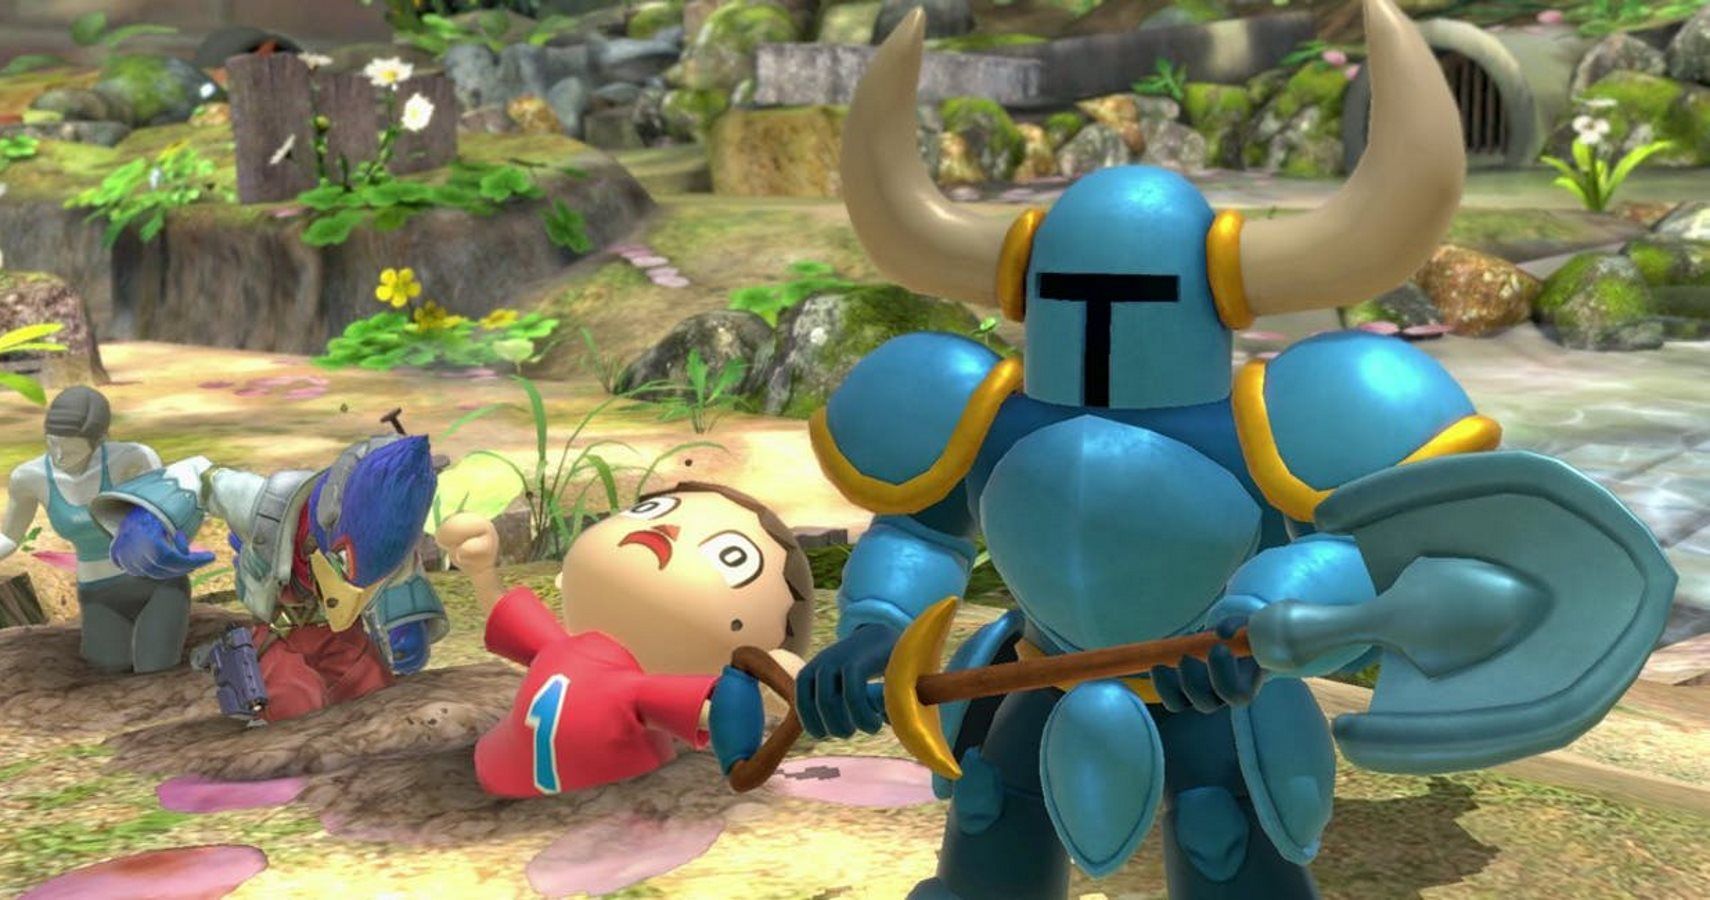 Watch: Shovel Knight Developers React To Finding Their Character In Smash